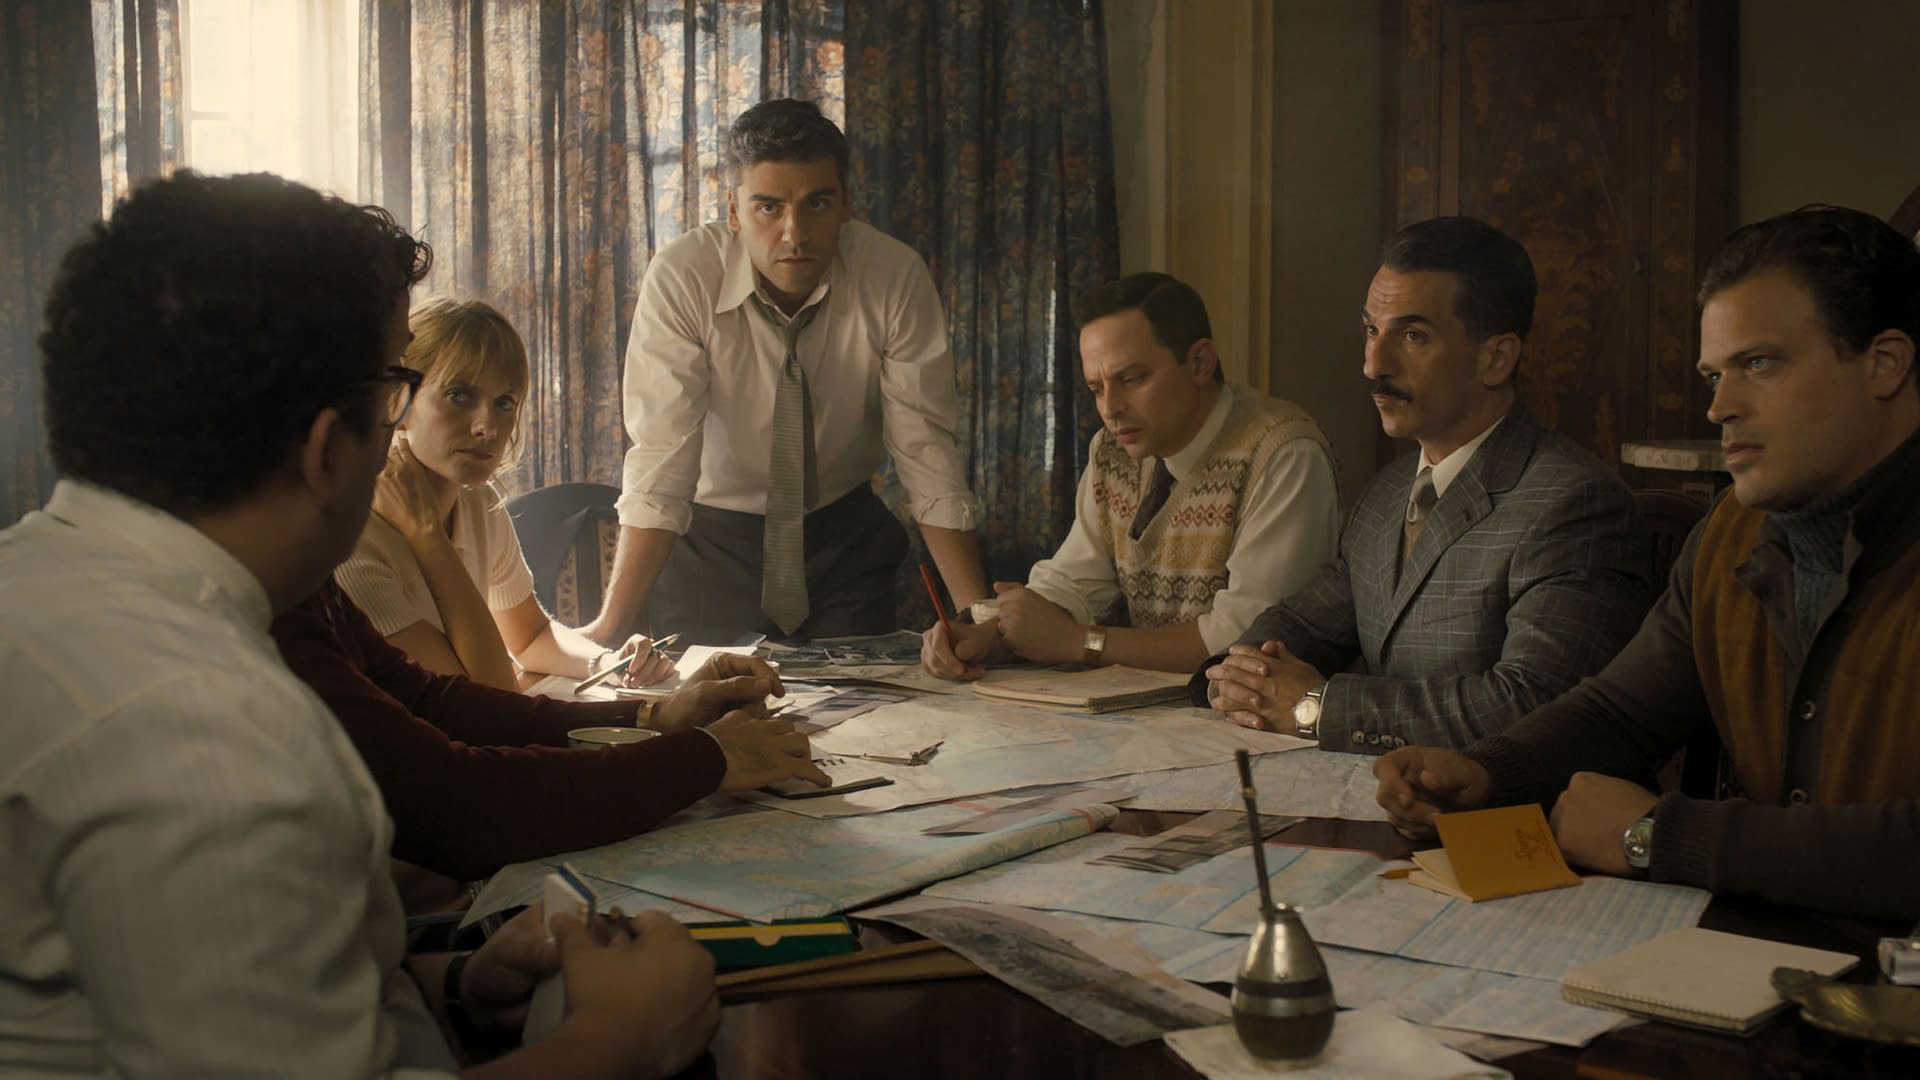 Operation Finale Releases an Official Poster and 2 Images